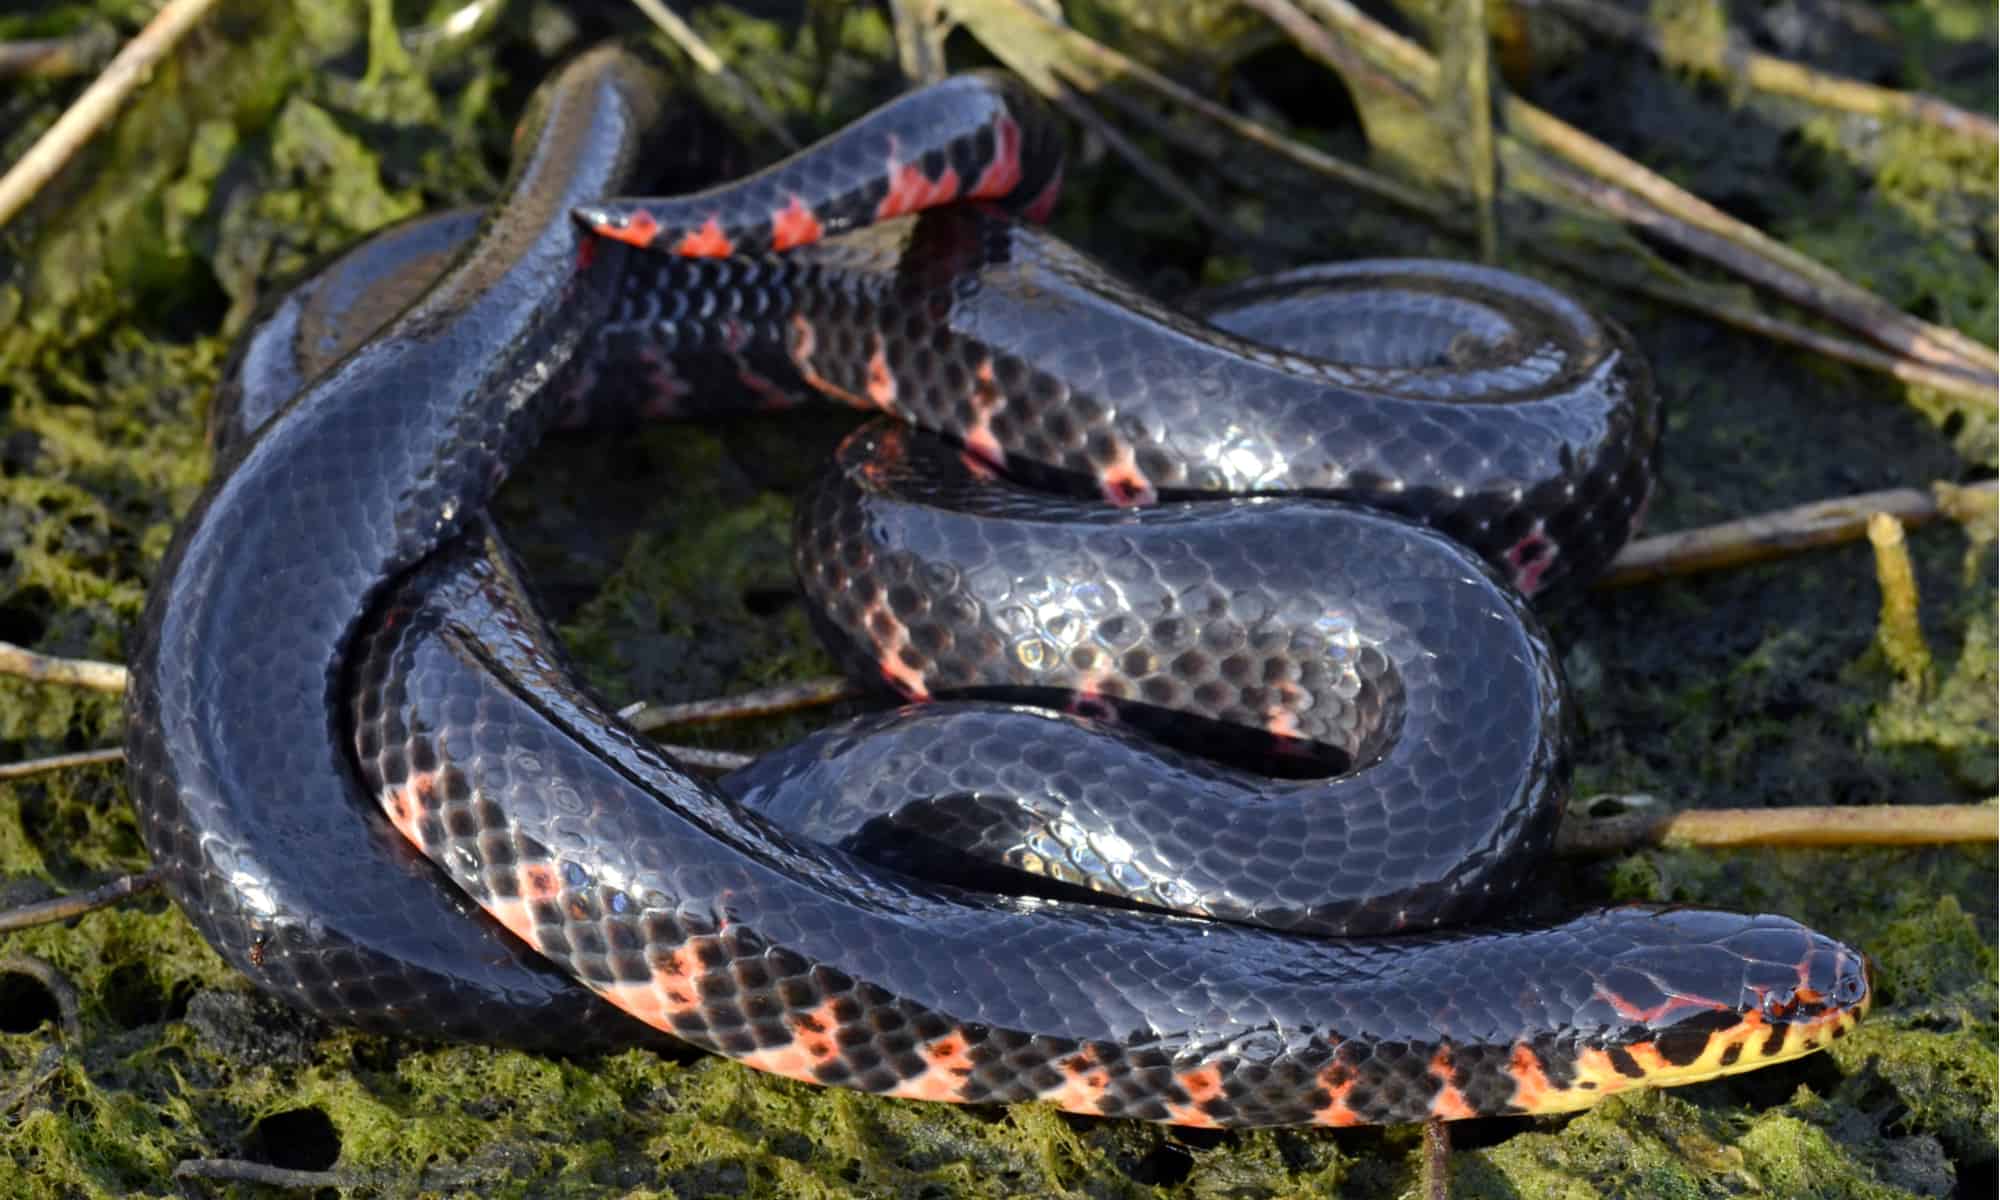 Deadly Snakes In Tennessee: Know The Venomous Species And Their Habitats